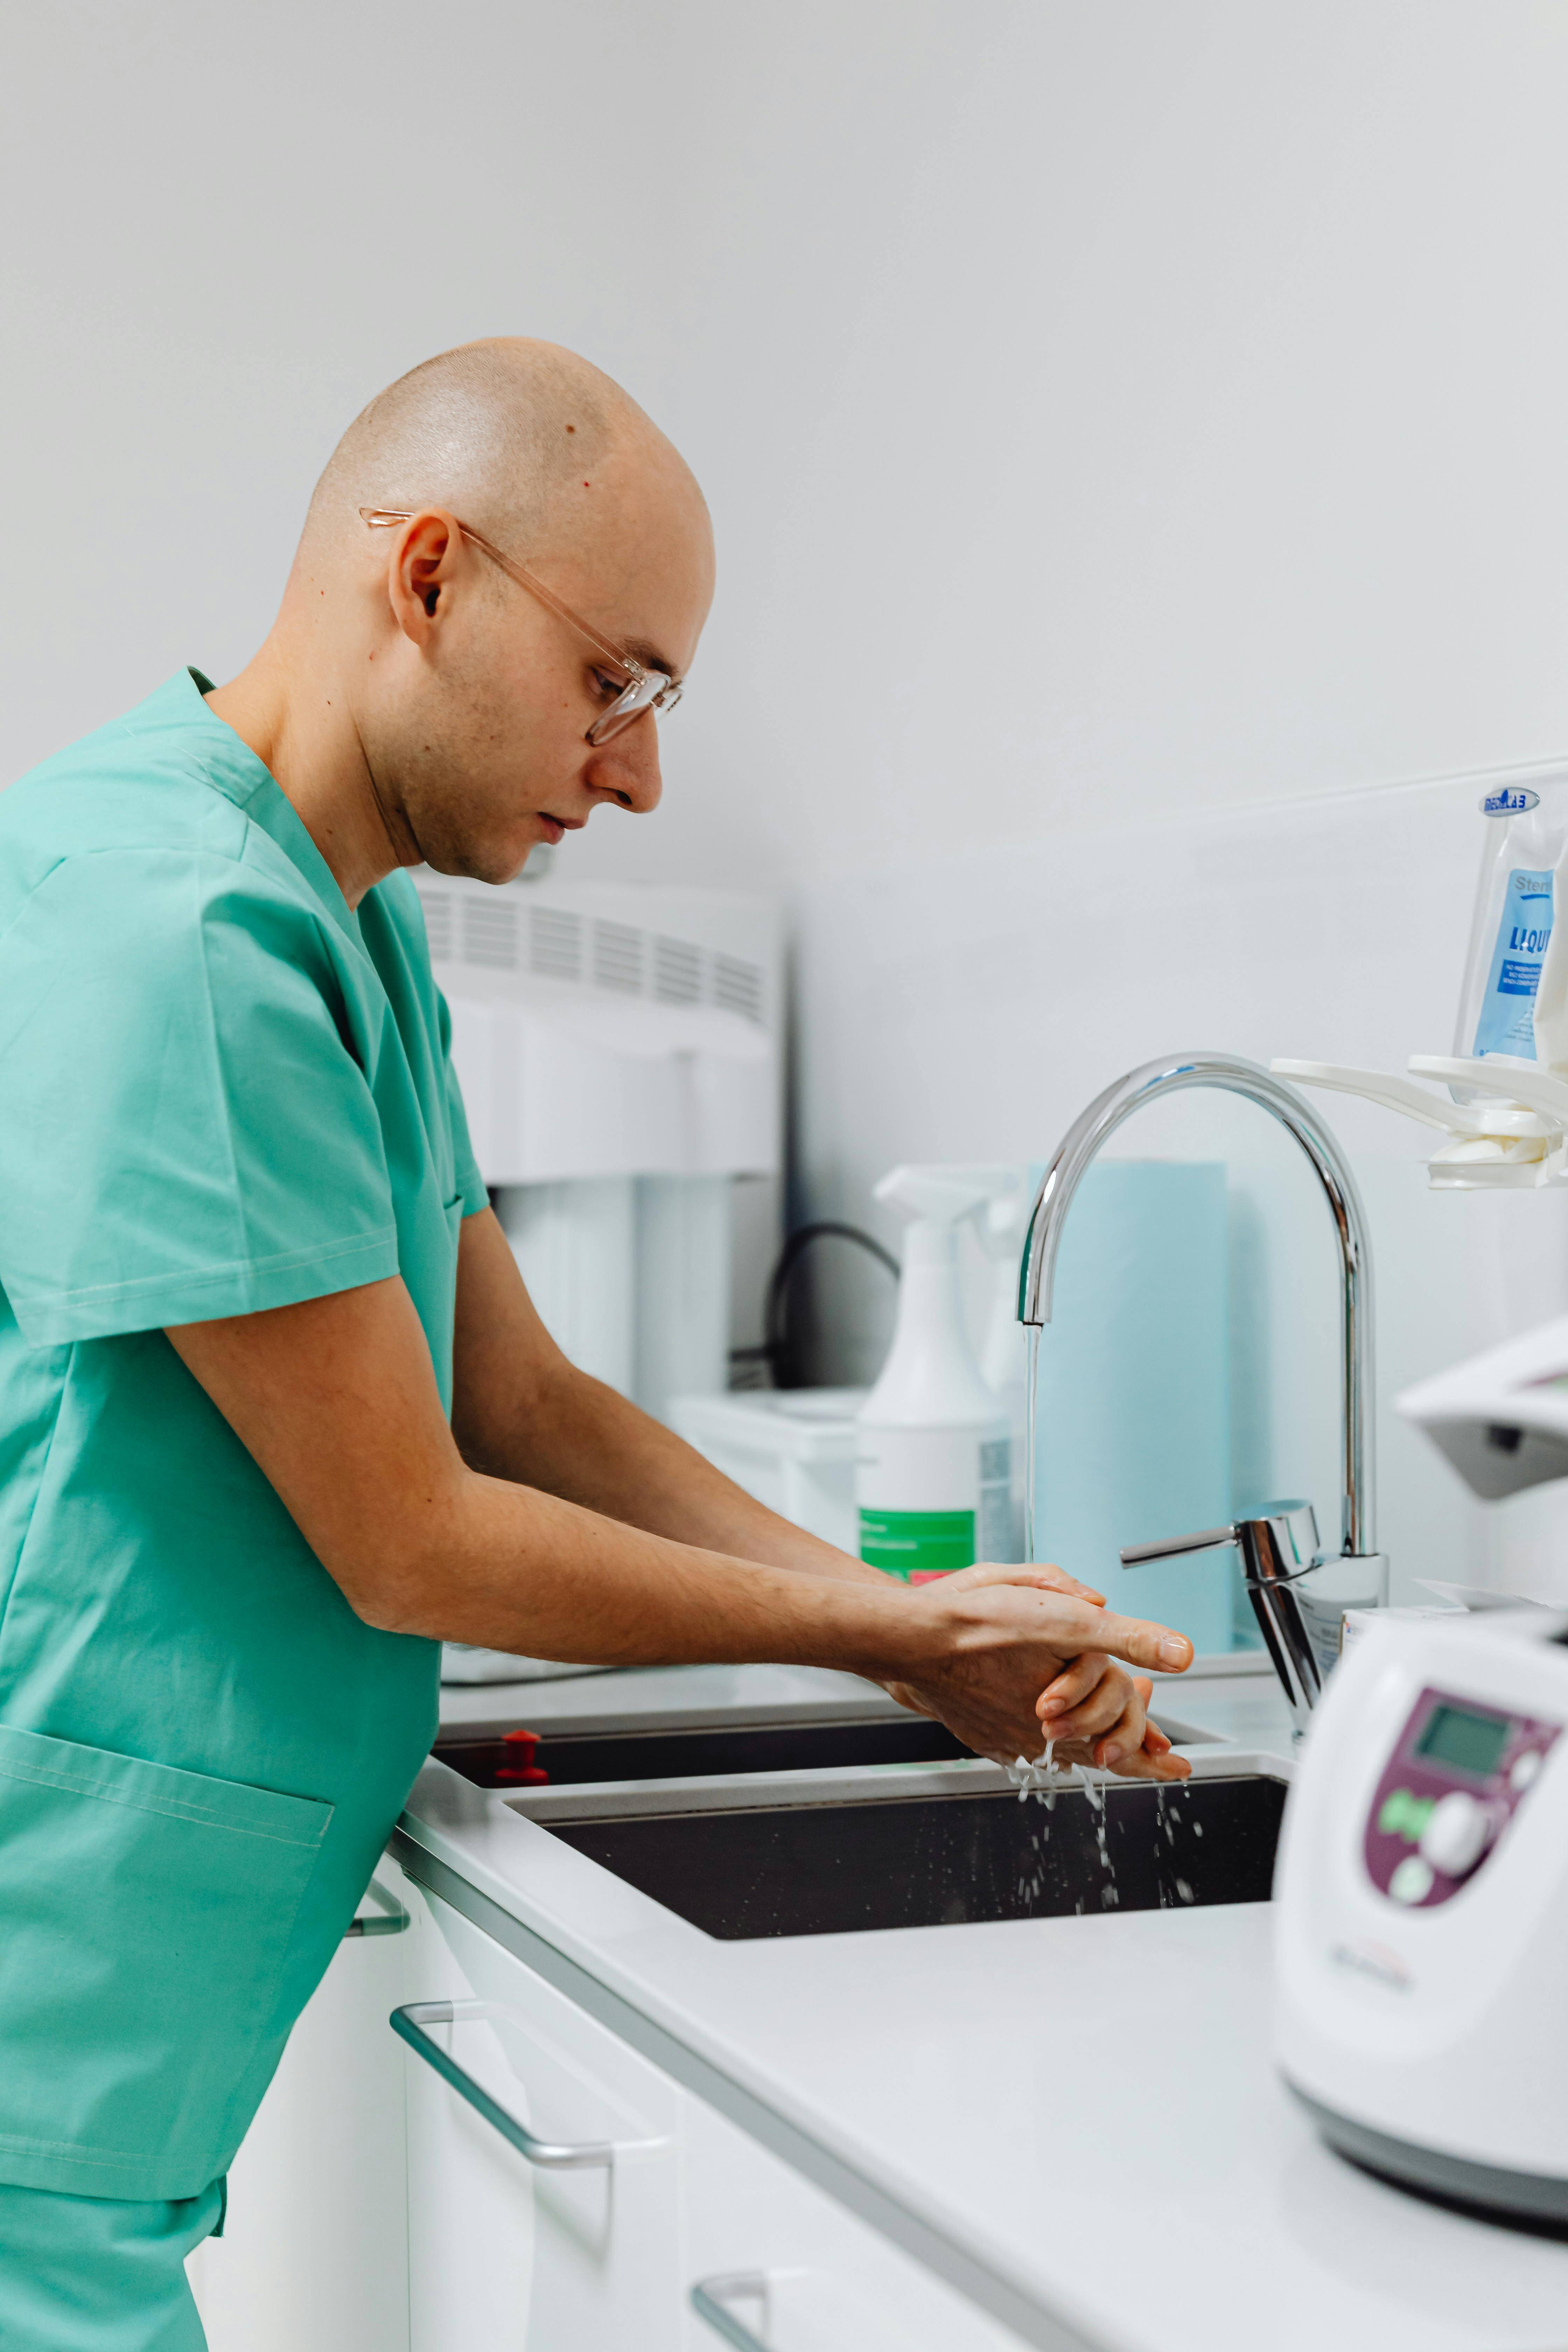 Choosing the Right Electronic Hand Hygiene System: Six Key Considerations